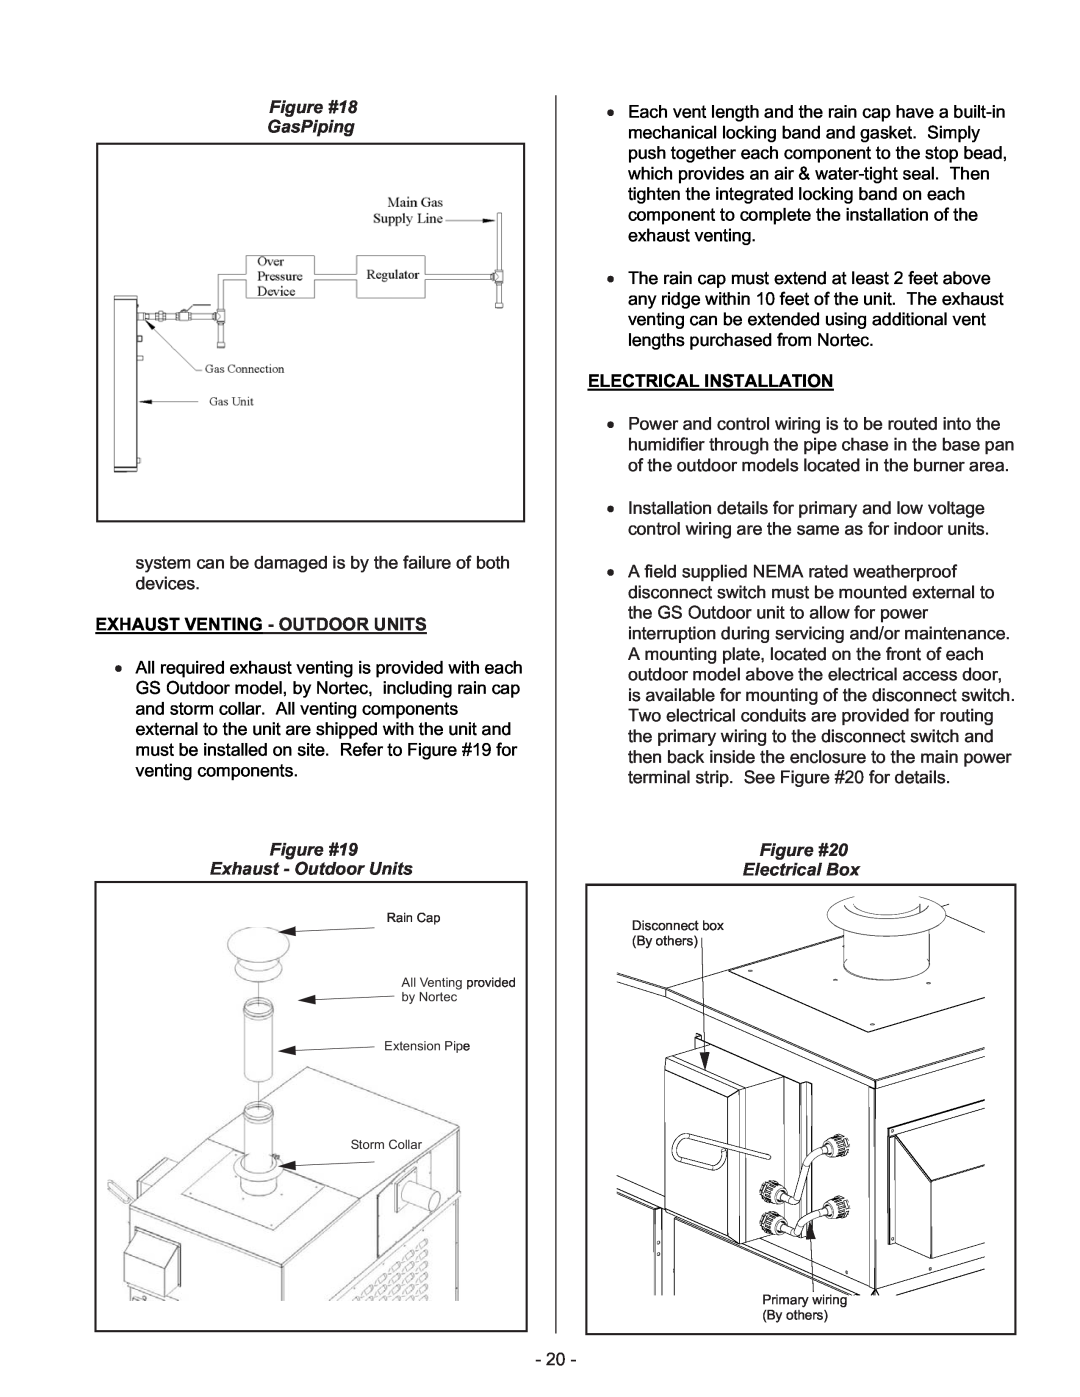 Nortec Industries GS Series manual Figure #18 GasPiping, Exhaust Venting- Outdoor Units, Figure #19 Exhaust - Outdoor Units 